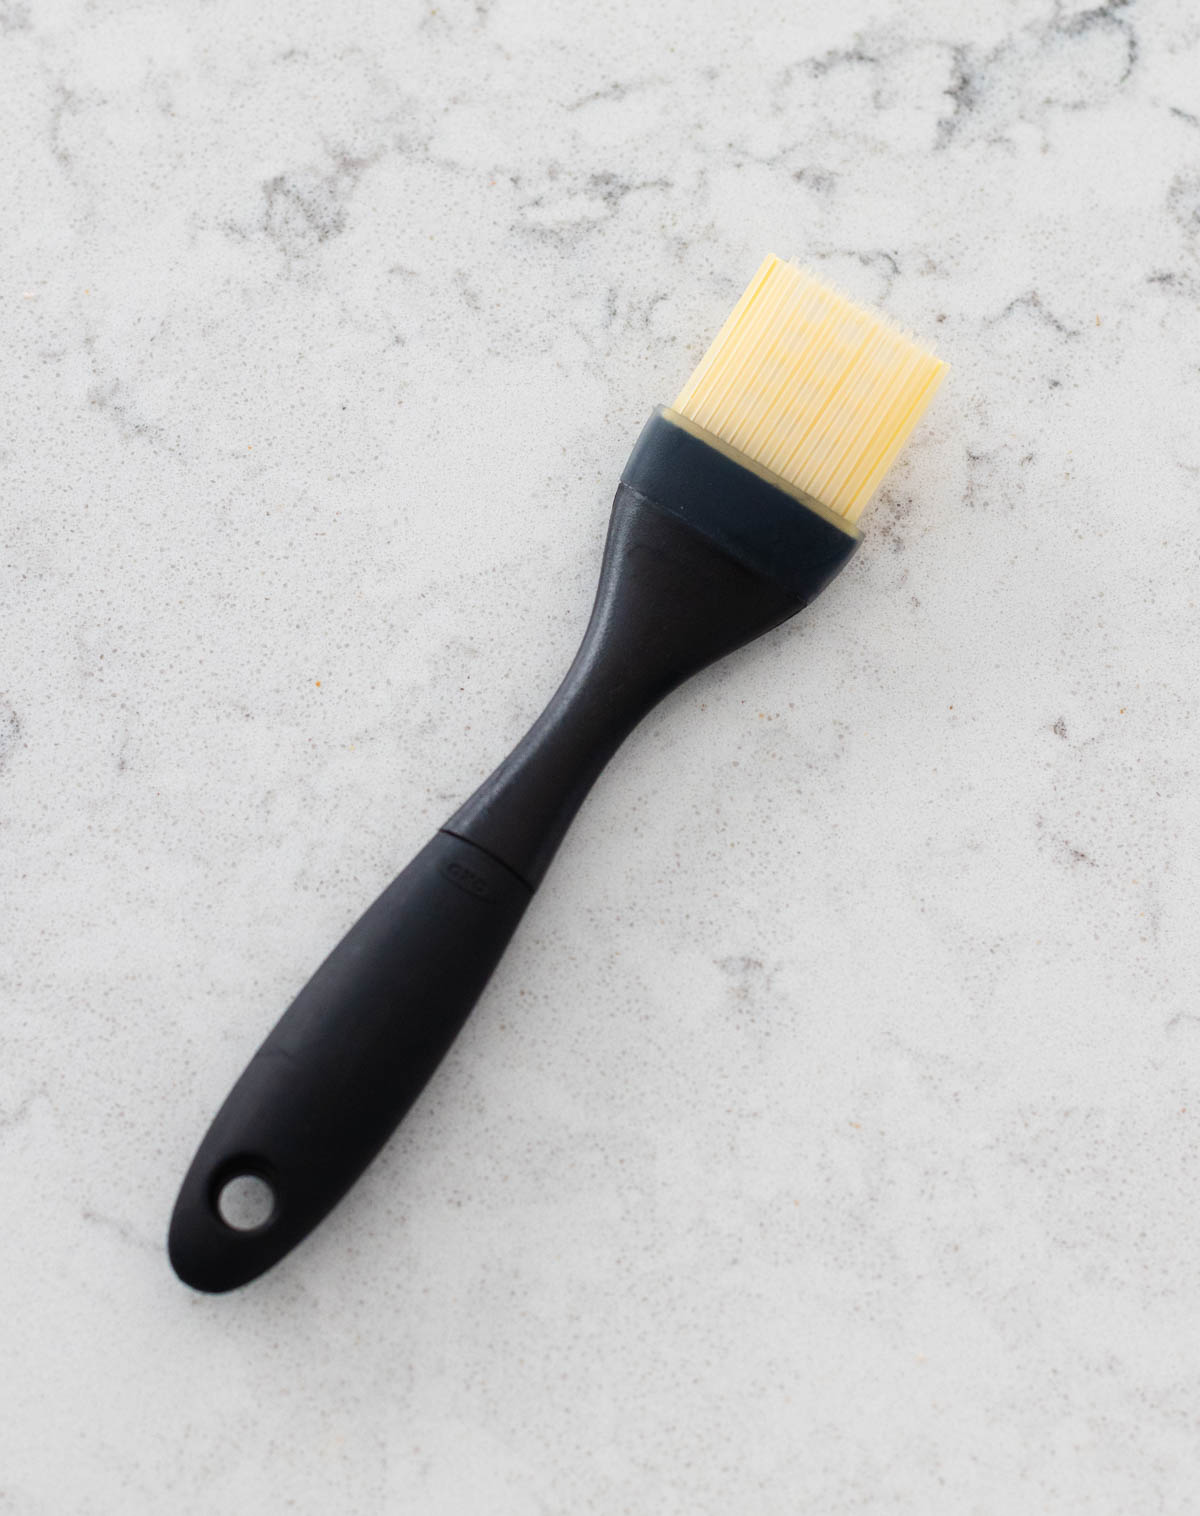 A black silicone pastry brush is on the counter.